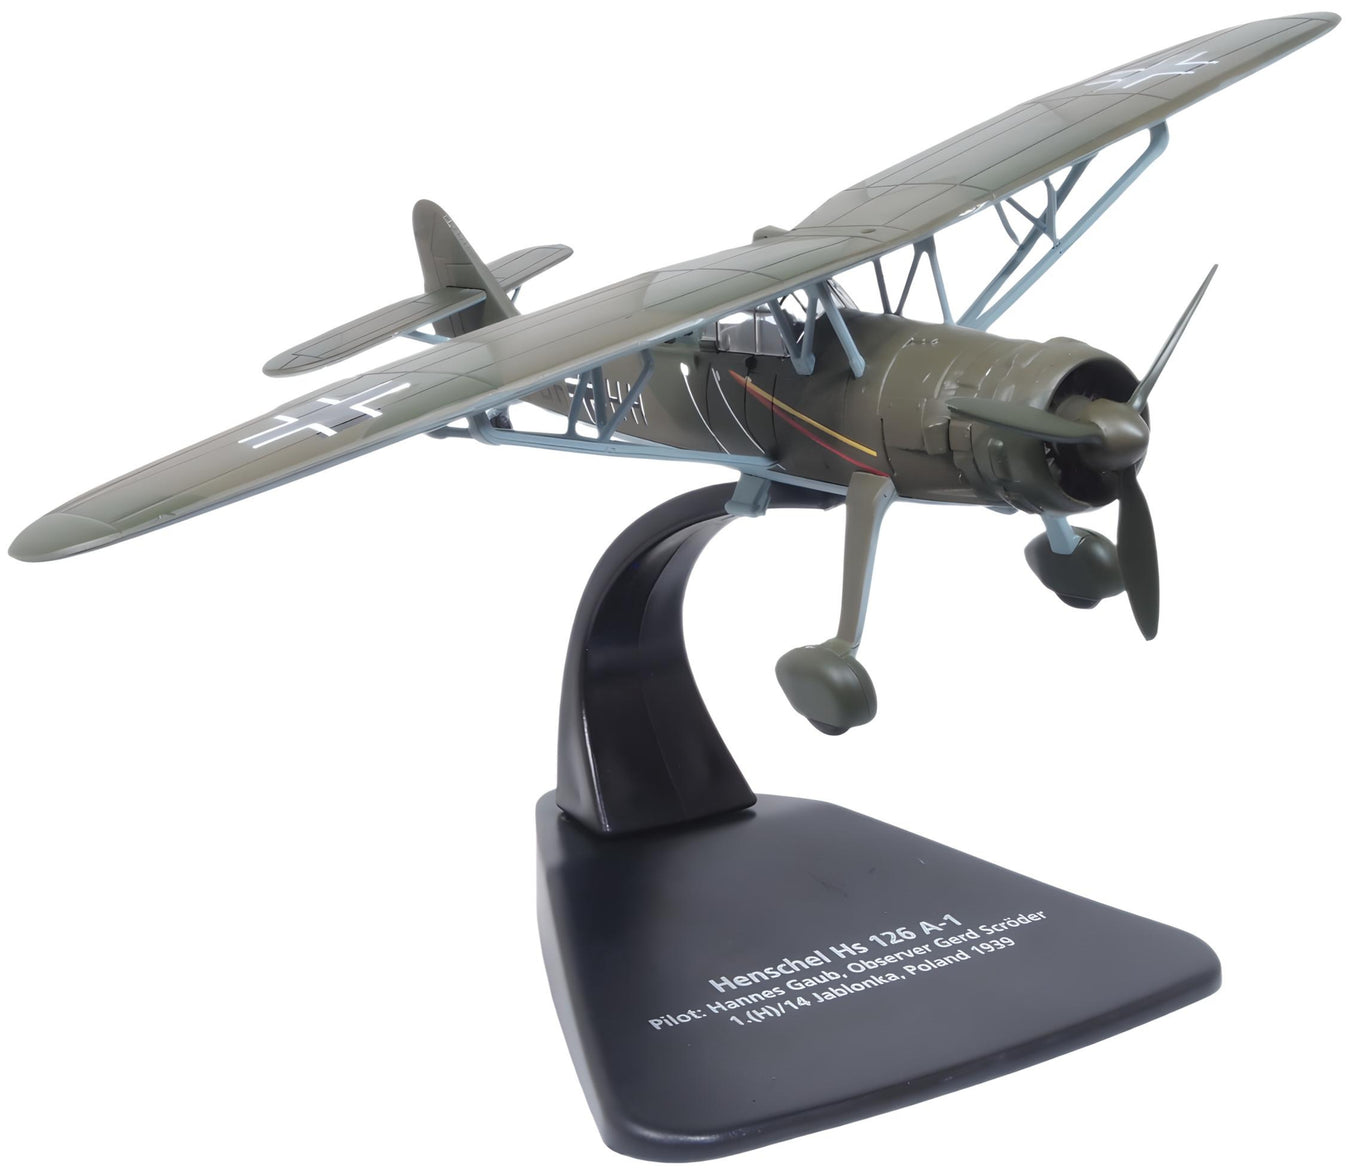 Oxford Aviation 1:72 Scale Model Aircraft from Oxford Diecast